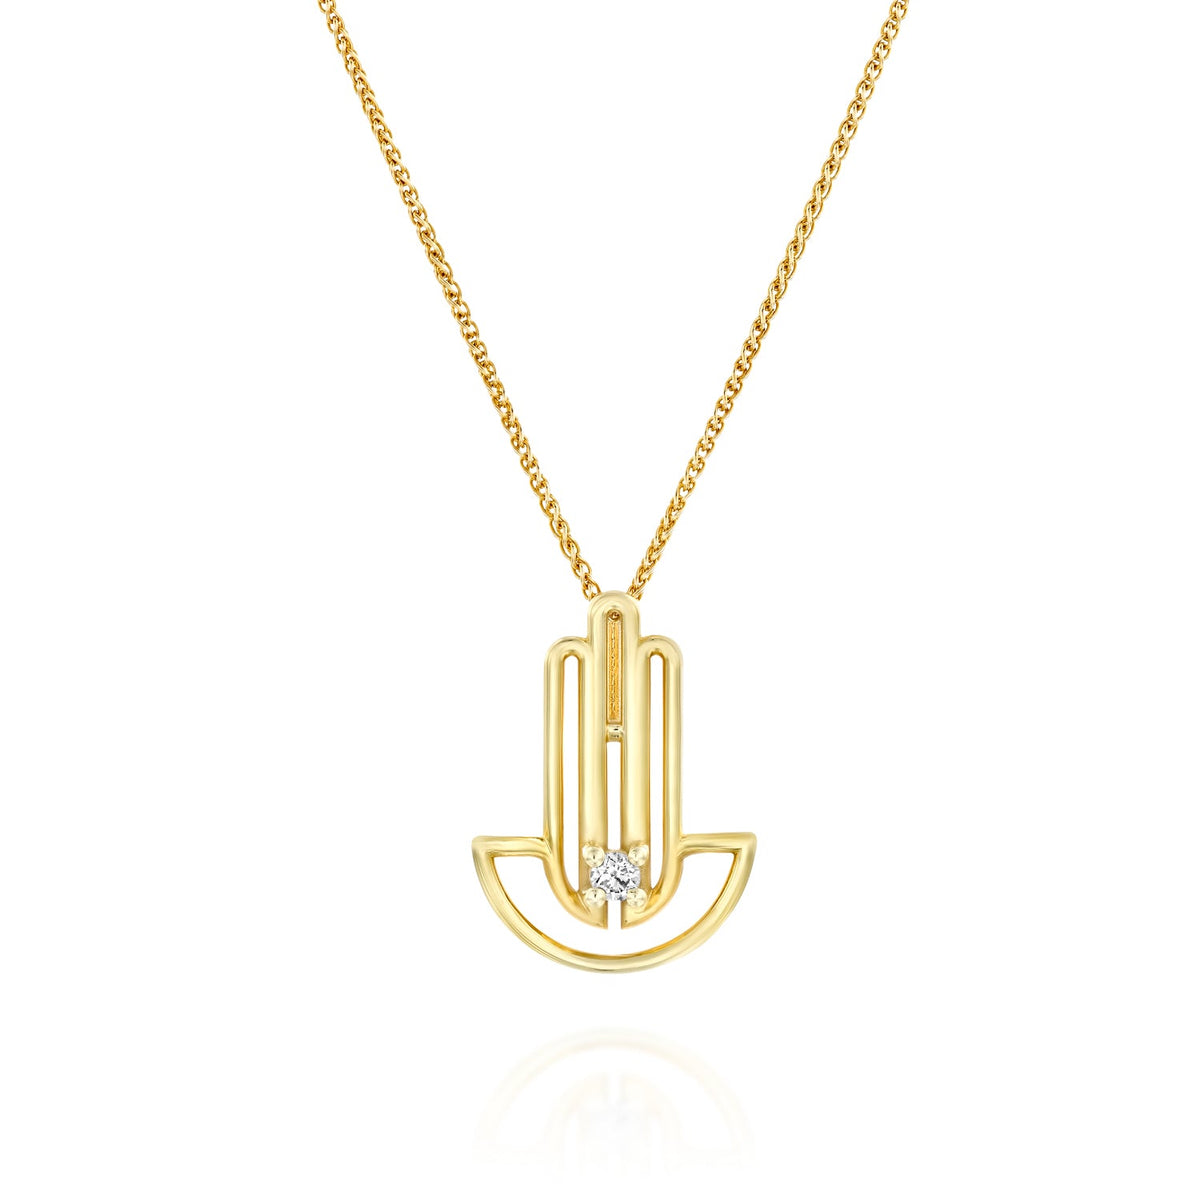 Hamsika Necklace - Gold Vermeil